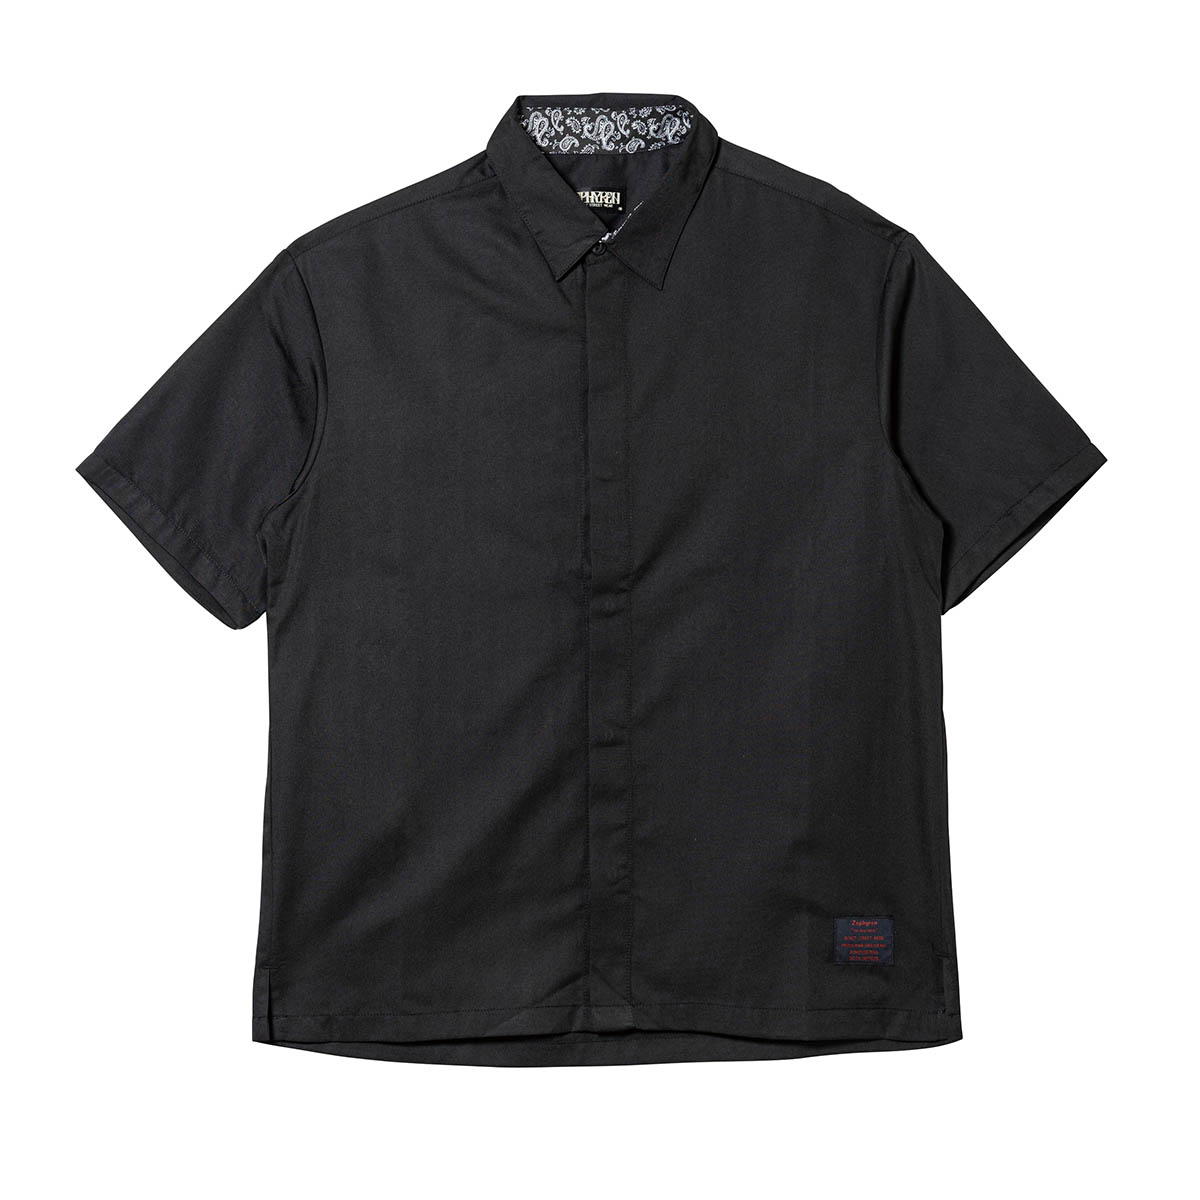 FLY FRONT SHIRT S/S BLACK